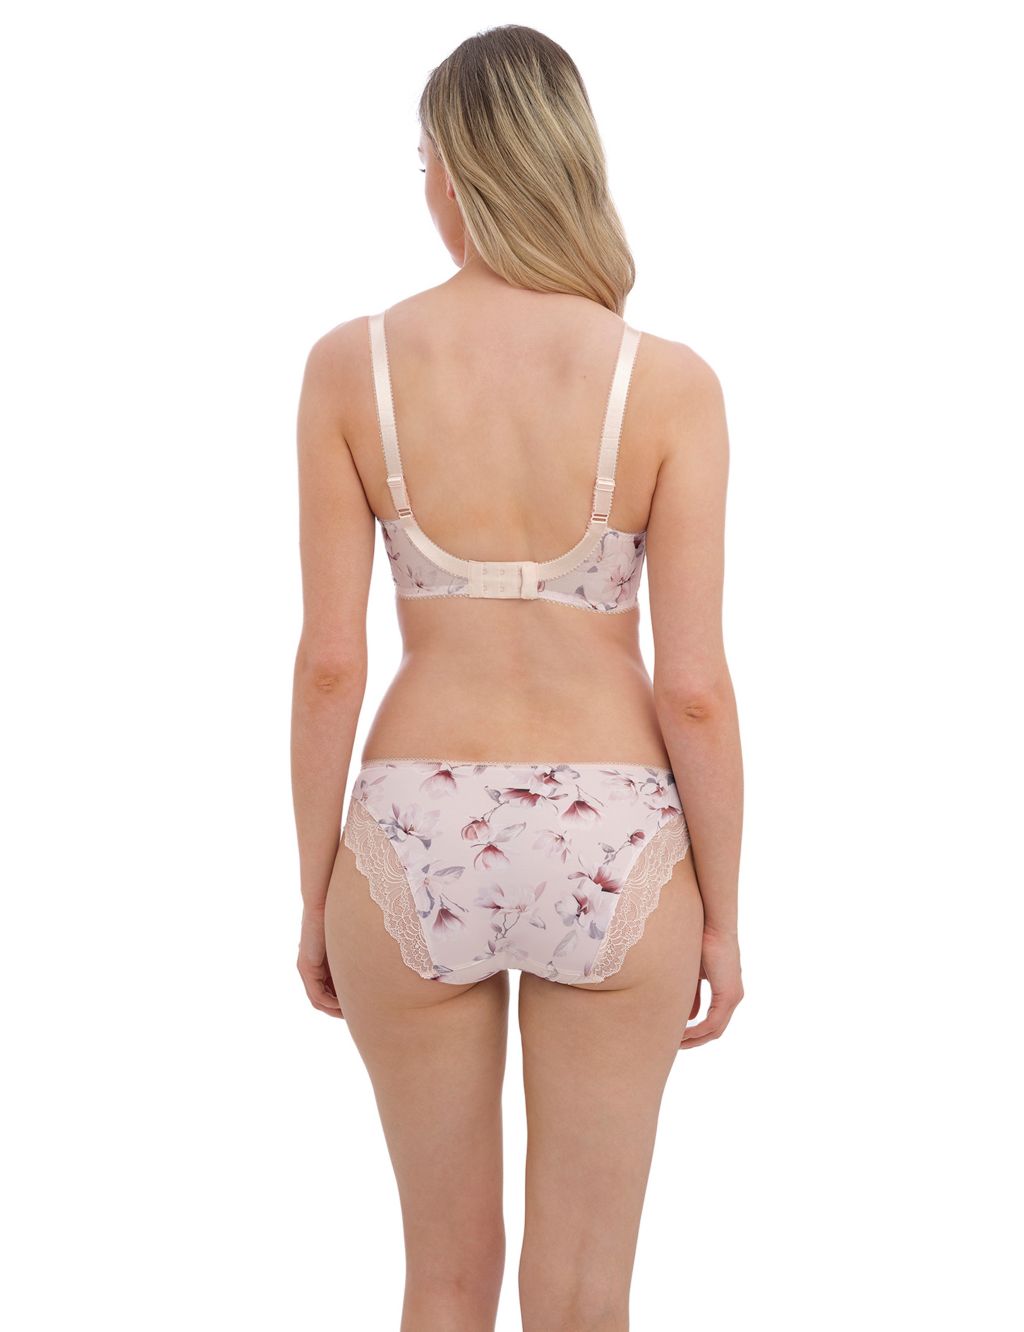 Lucia Lace Floral Knickers image 4